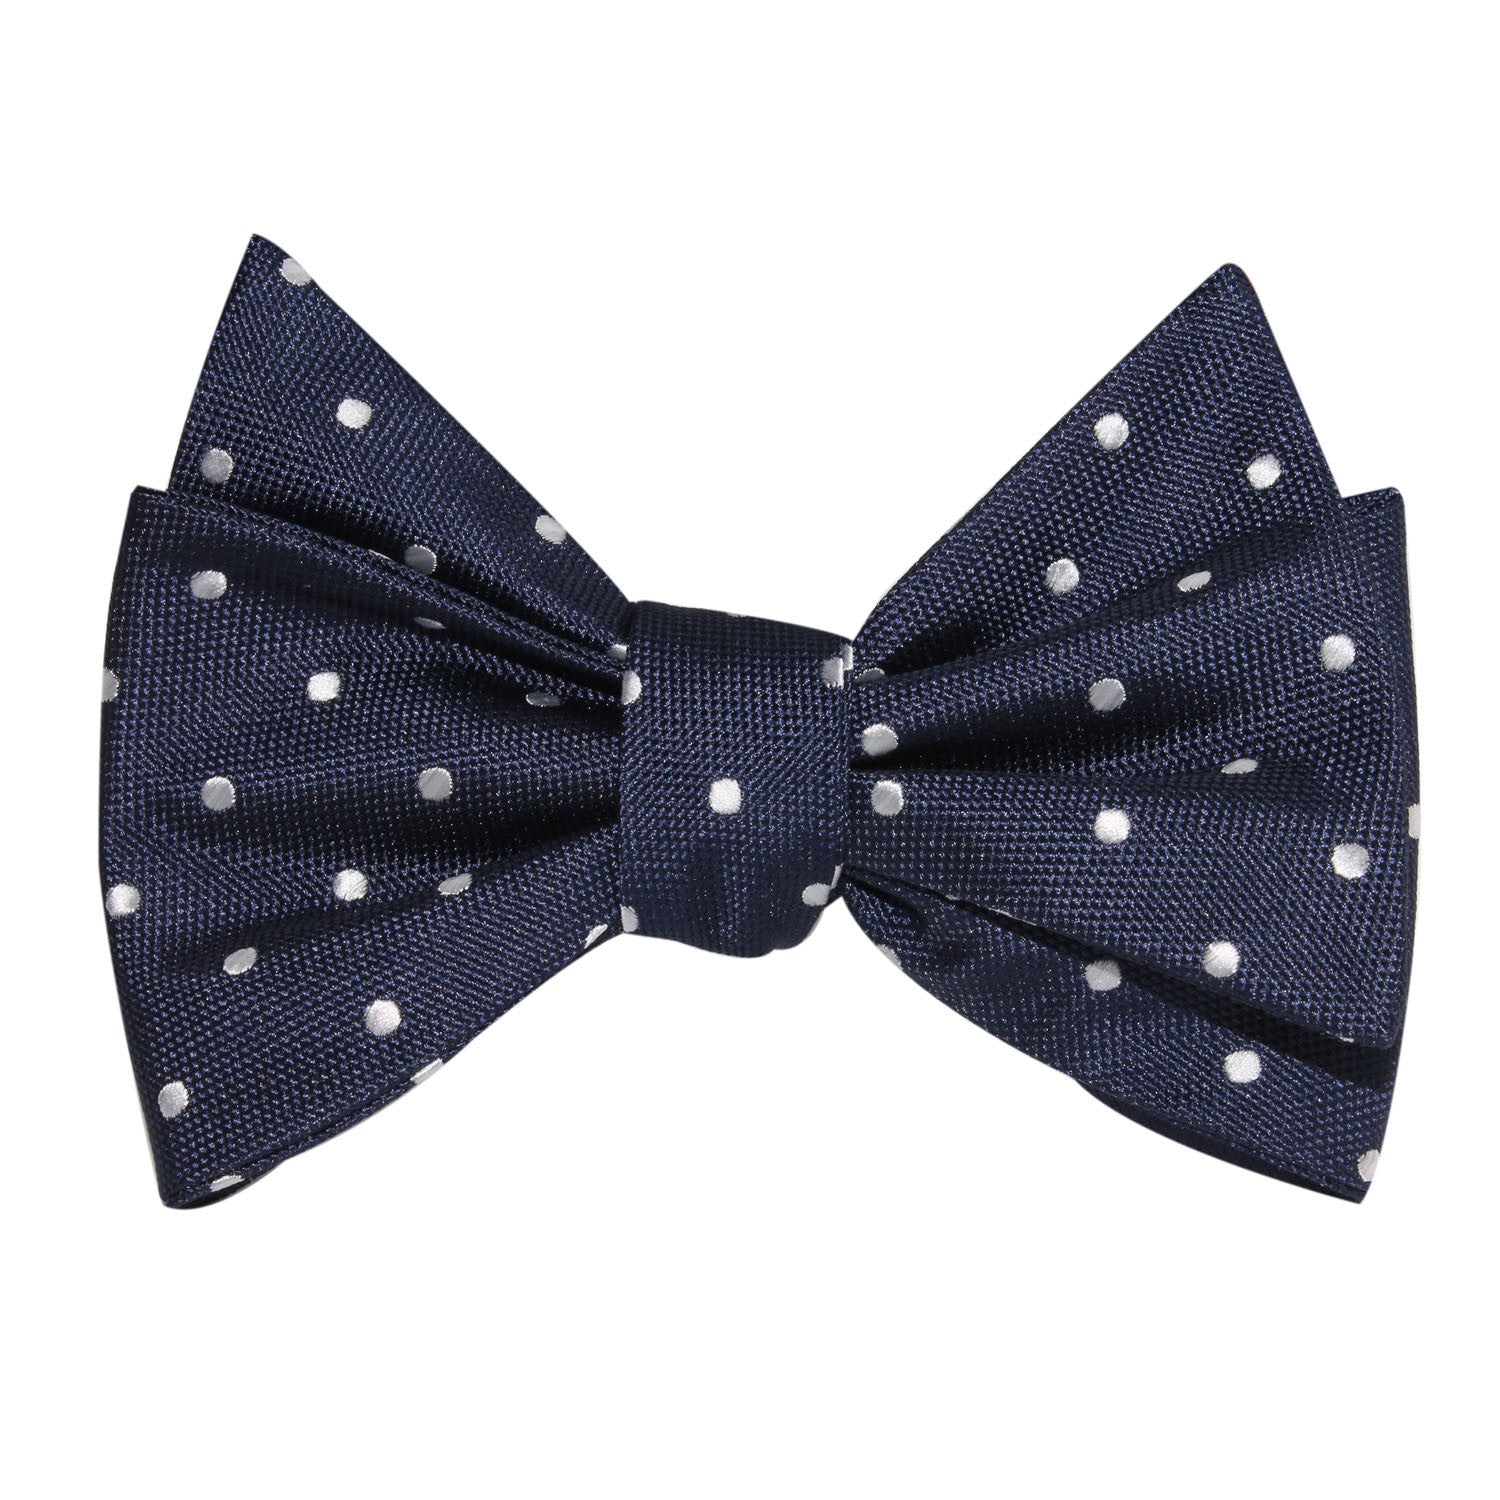 Navy Blue with White Polka Dots - Bow Tie (Untied) 2